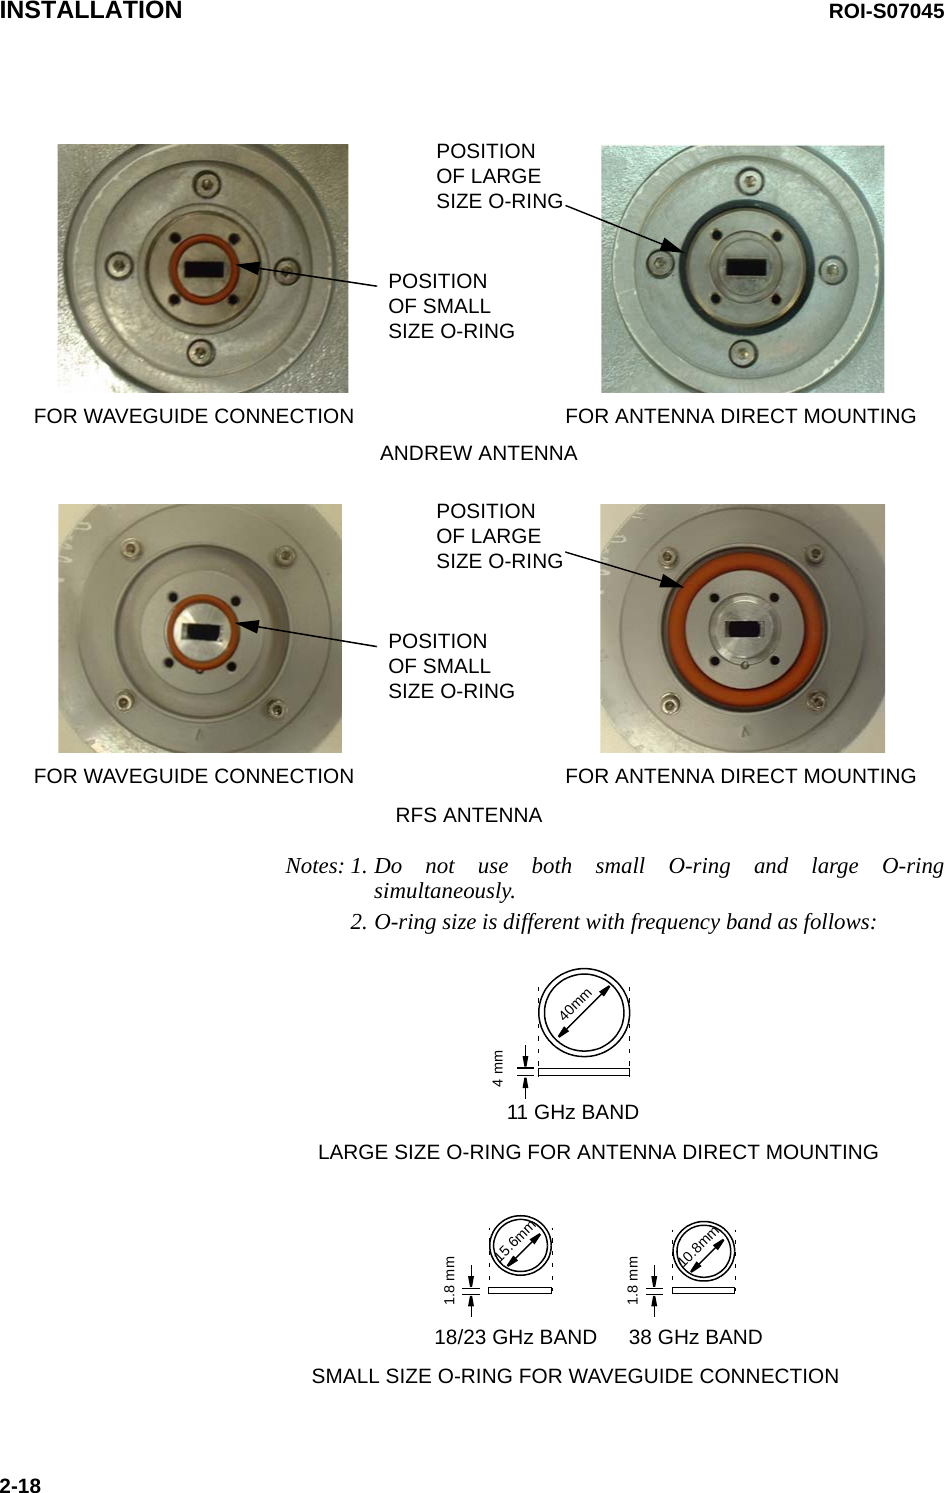 INSTALLATION ROI-S070452-18Notes: 1. Do not use both small O-ring and large O-ringsimultaneously.2. O-ring size is different with frequency band as follows:POSITION OF LARGE SIZE O-RINGPOSITION OF SMALL SIZE O-RINGFOR WAVEGUIDE CONNECTION FOR ANTENNA DIRECT MOUNTINGANDREW ANTENNAPOSITION OF LARGE SIZE O-RINGPOSITION OF SMALL SIZE O-RINGFOR WAVEGUIDE CONNECTION FOR ANTENNA DIRECT MOUNTINGRFS ANTENNALARGE SIZE O-RING FOR ANTENNA DIRECT MOUNTING40mm11 GHz BAND4 mm18/23 GHz BAND 38 GHz BAND15.6mmSMALL SIZE O-RING FOR WAVEGUIDE CONNECTION10.8mm1.8 mm1.8 mm